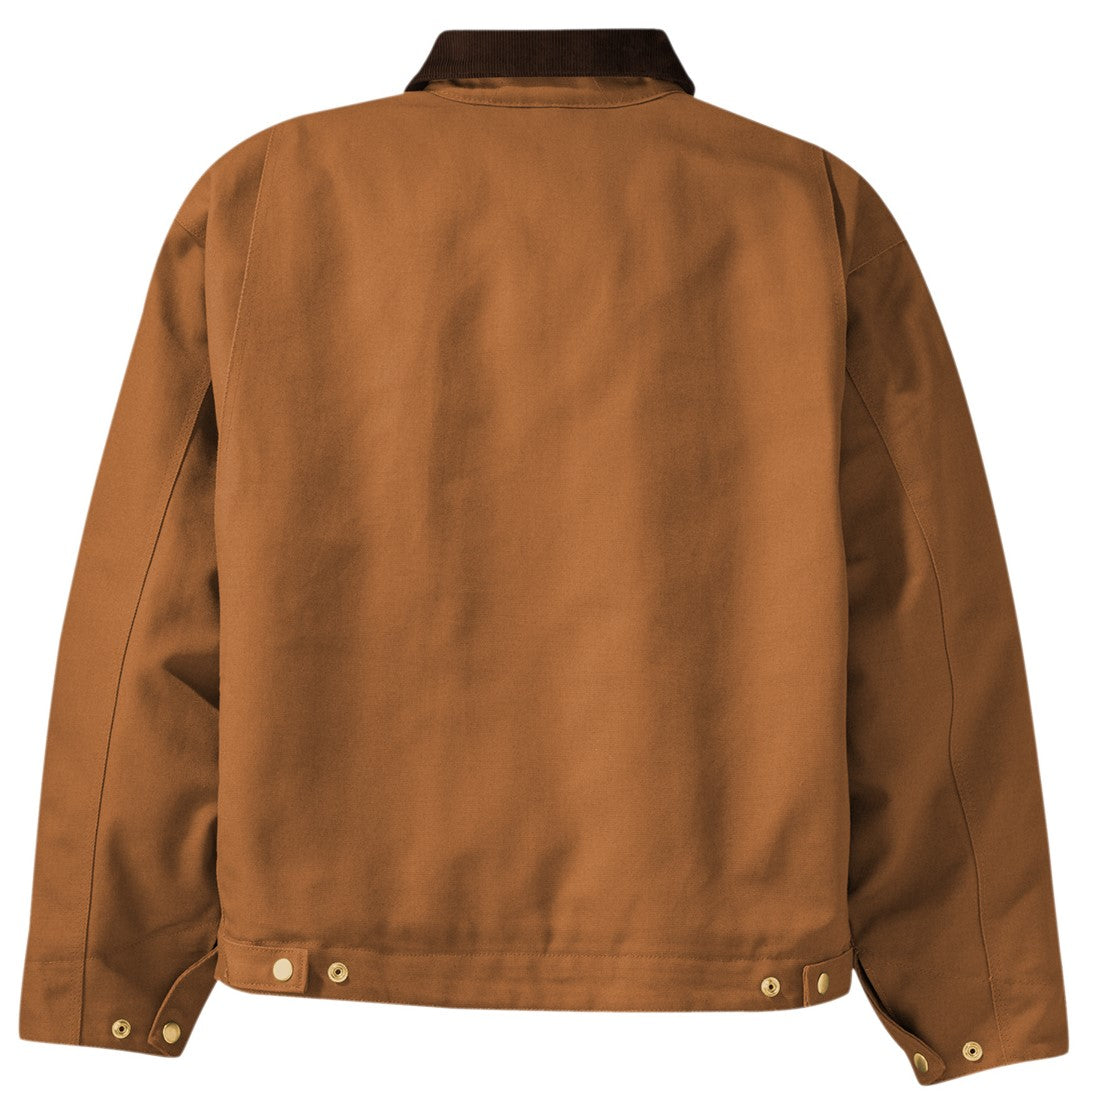 Duck Brown canvas jacket with corduroy collar by Flying R Ranchwear